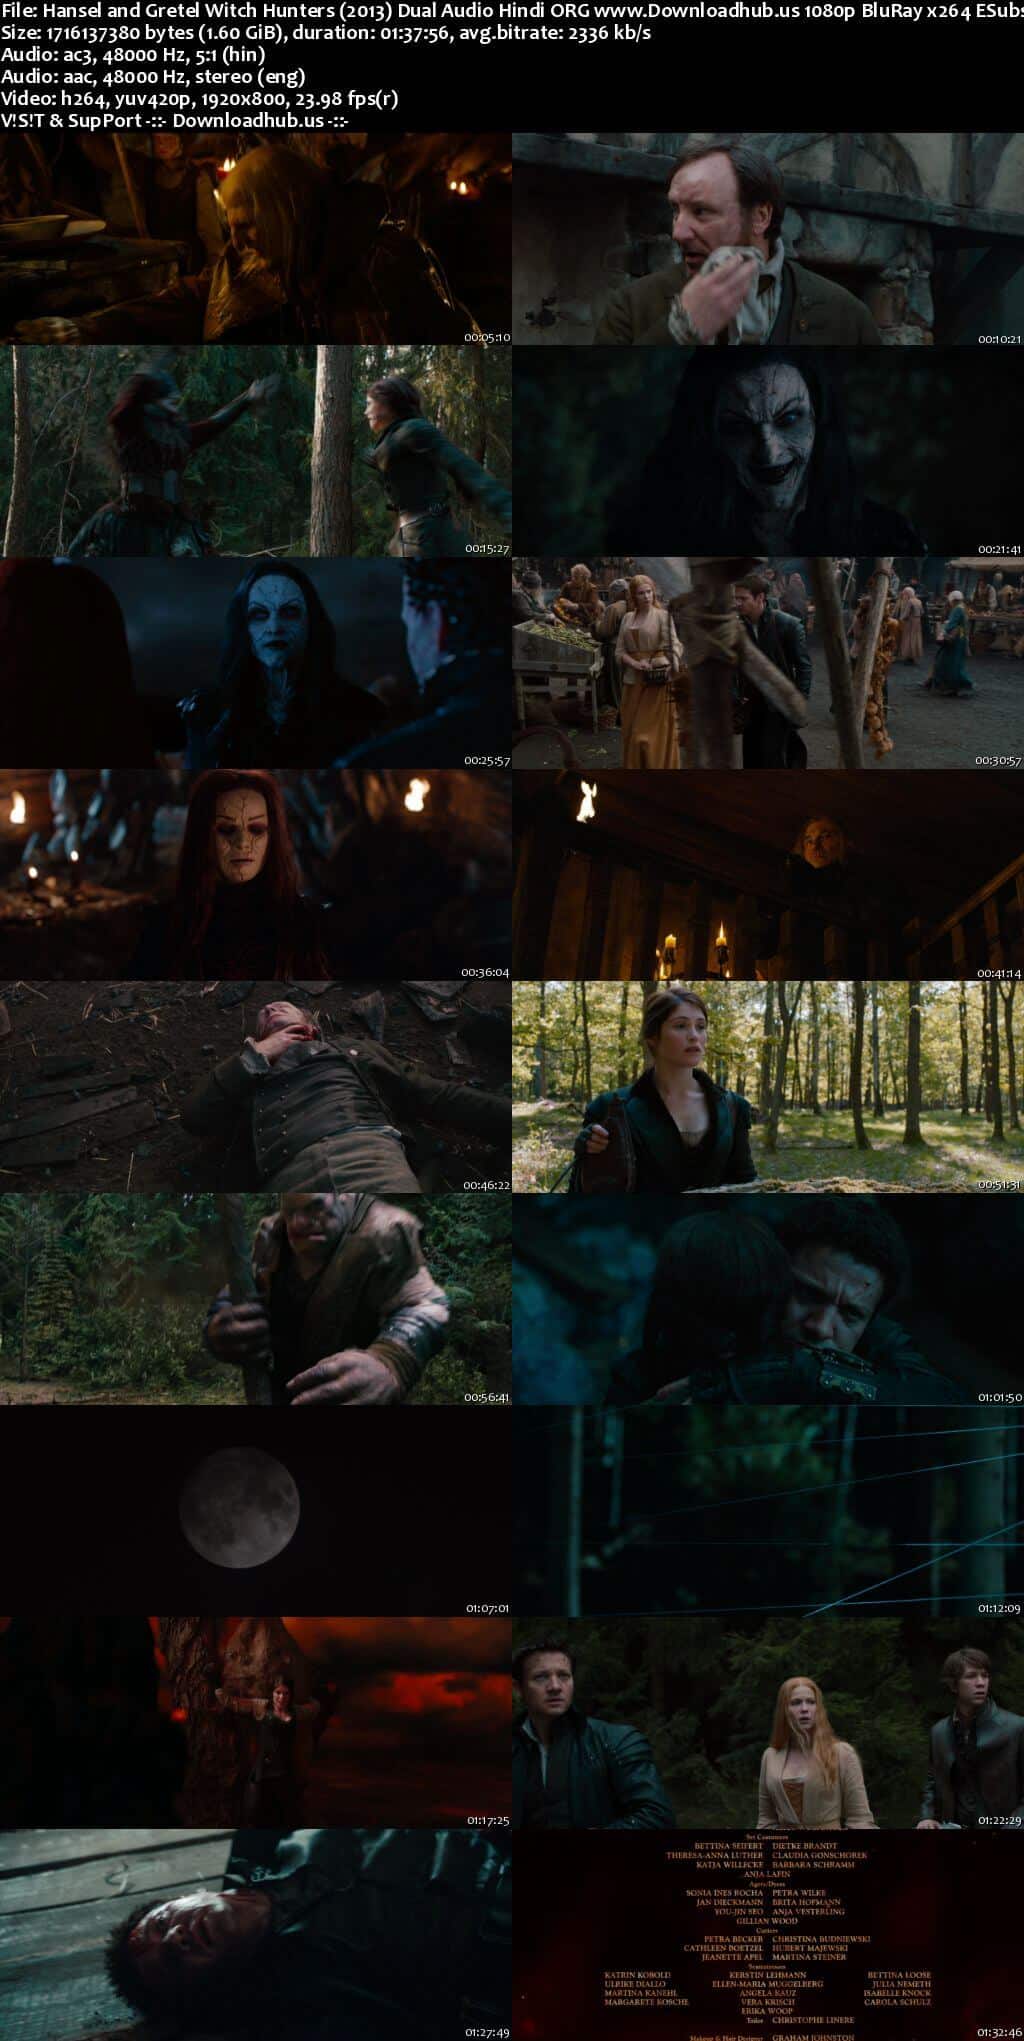 Hansel And Gretel Witch Hunters 2013 Hindi Dual Audio 1080p 720p 480p BluRay ESubs